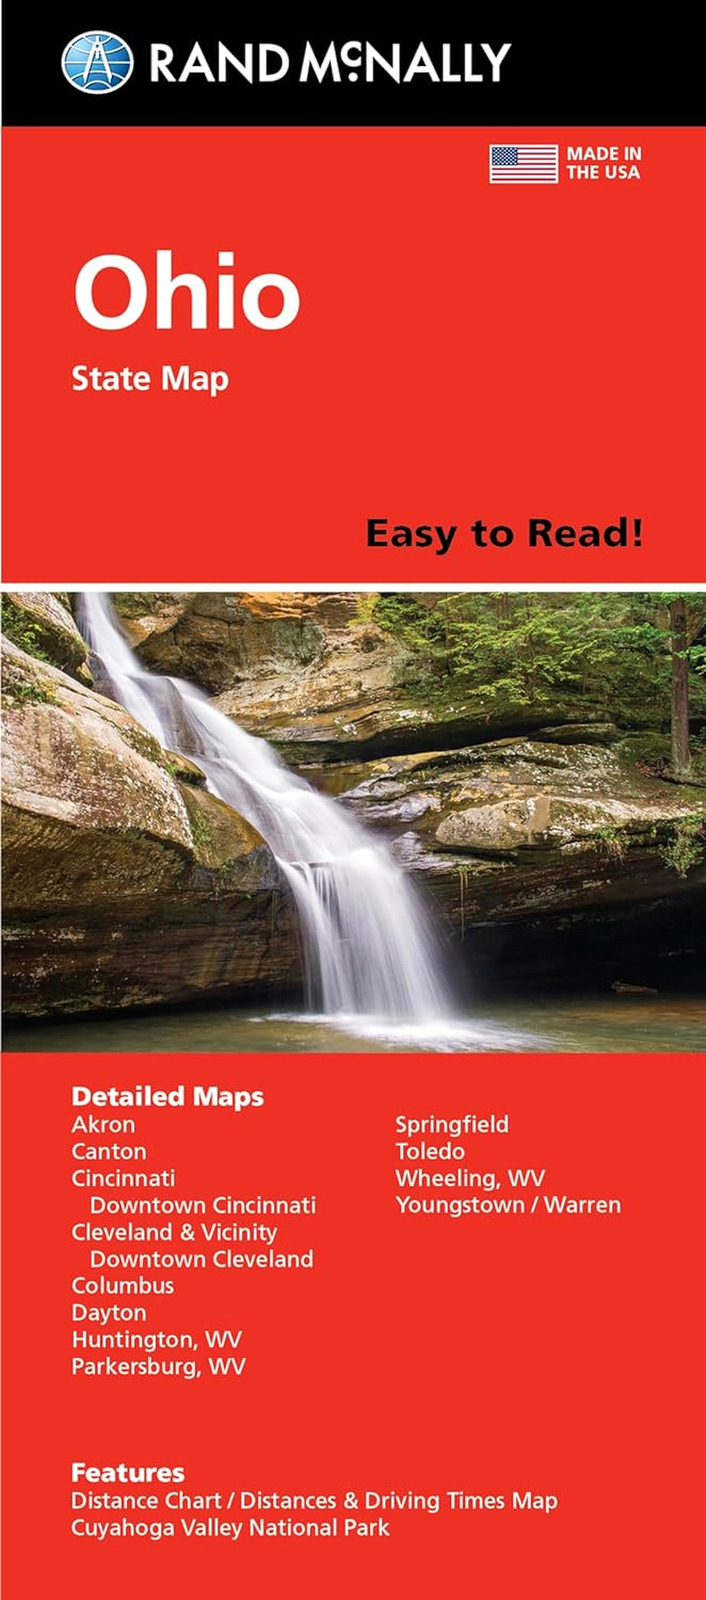 Rand Mcnally Easy to Read Folded Map: Ohio State Map - NEW